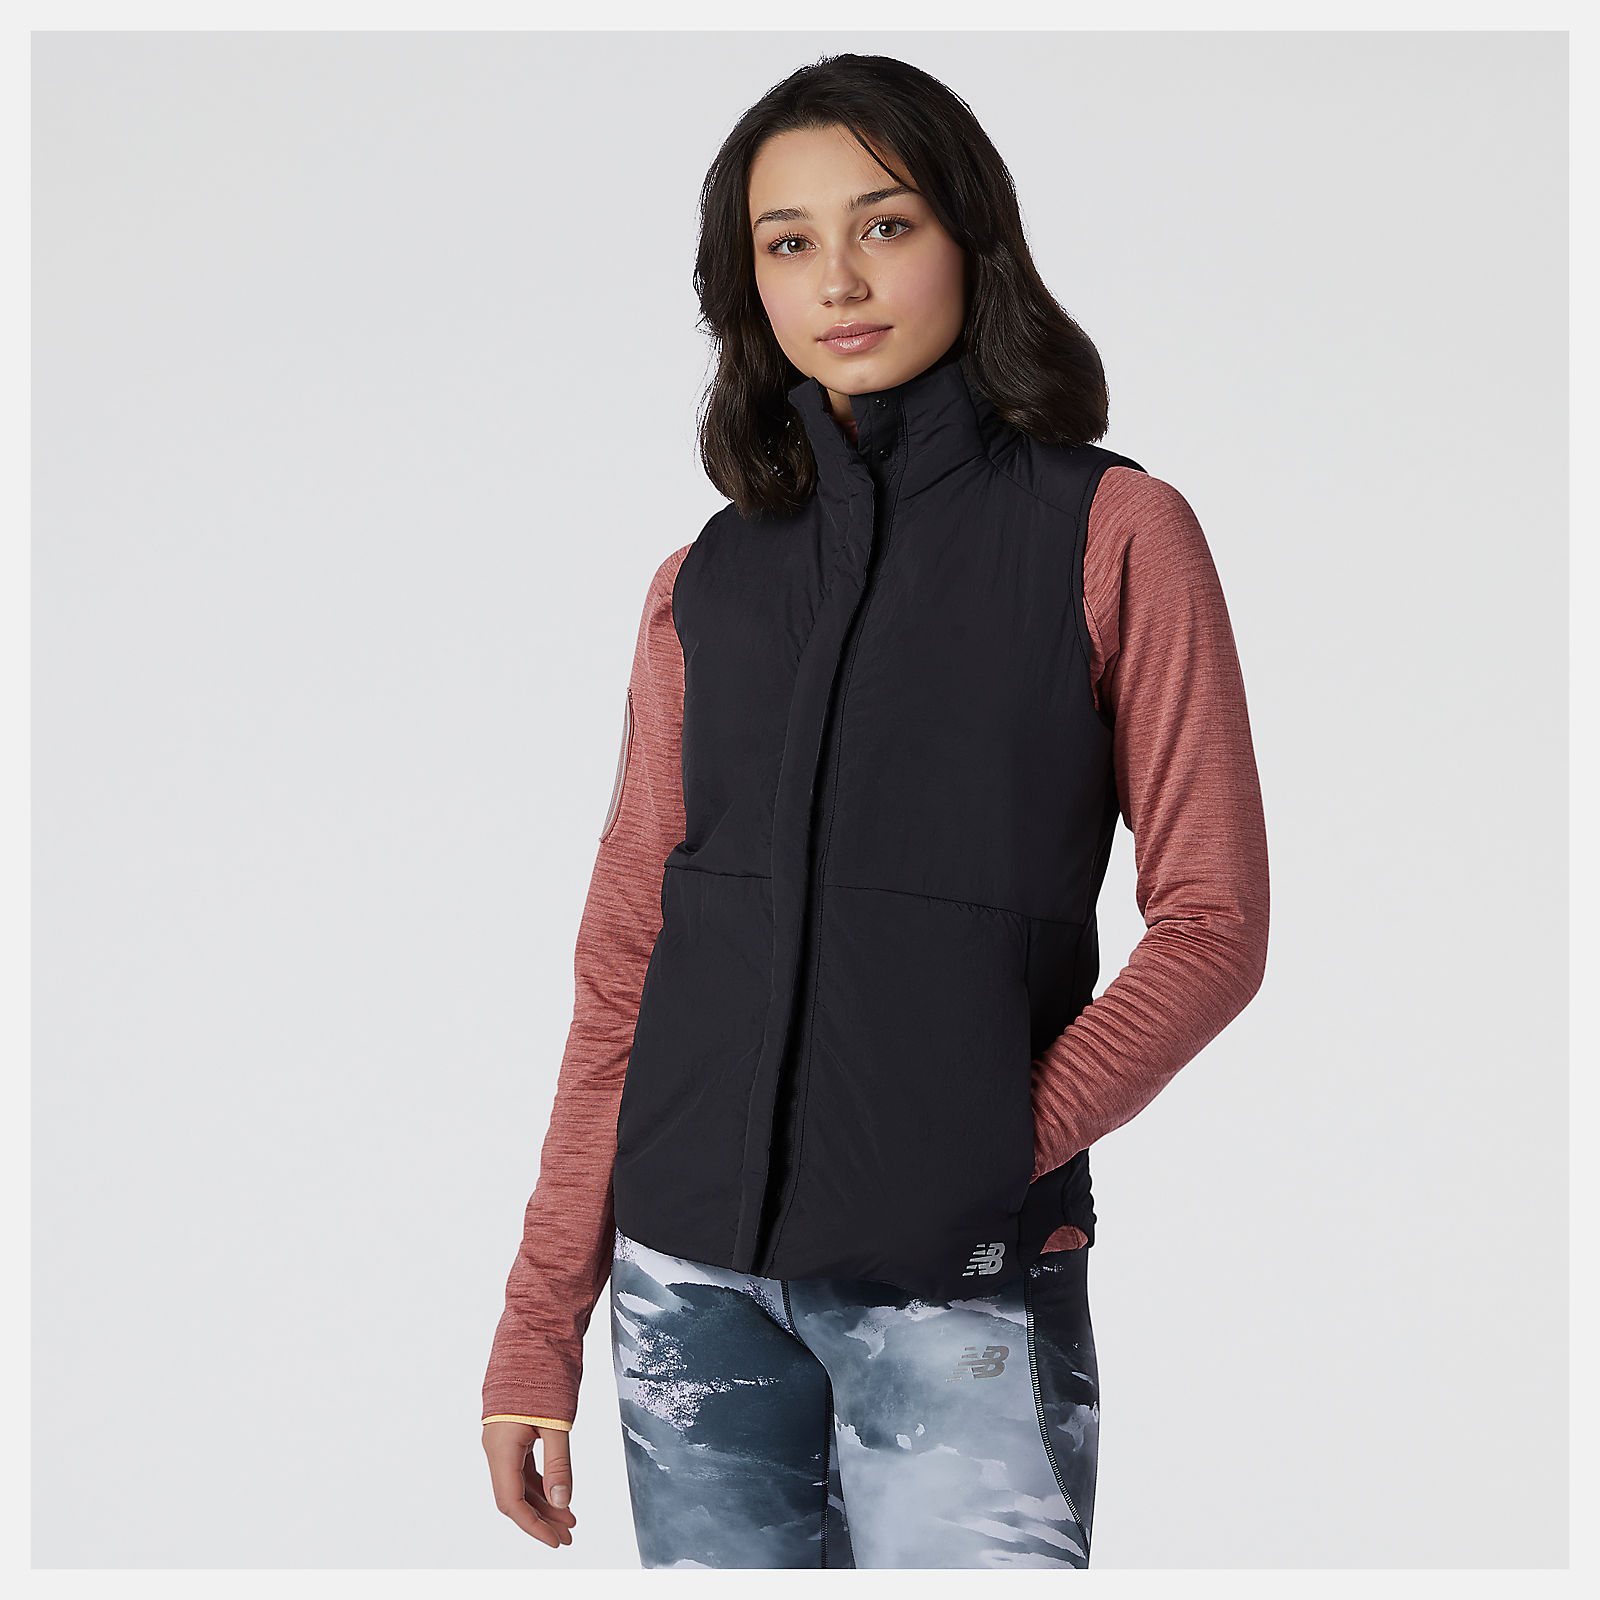 New balance vest womens money under 30 investing in penny